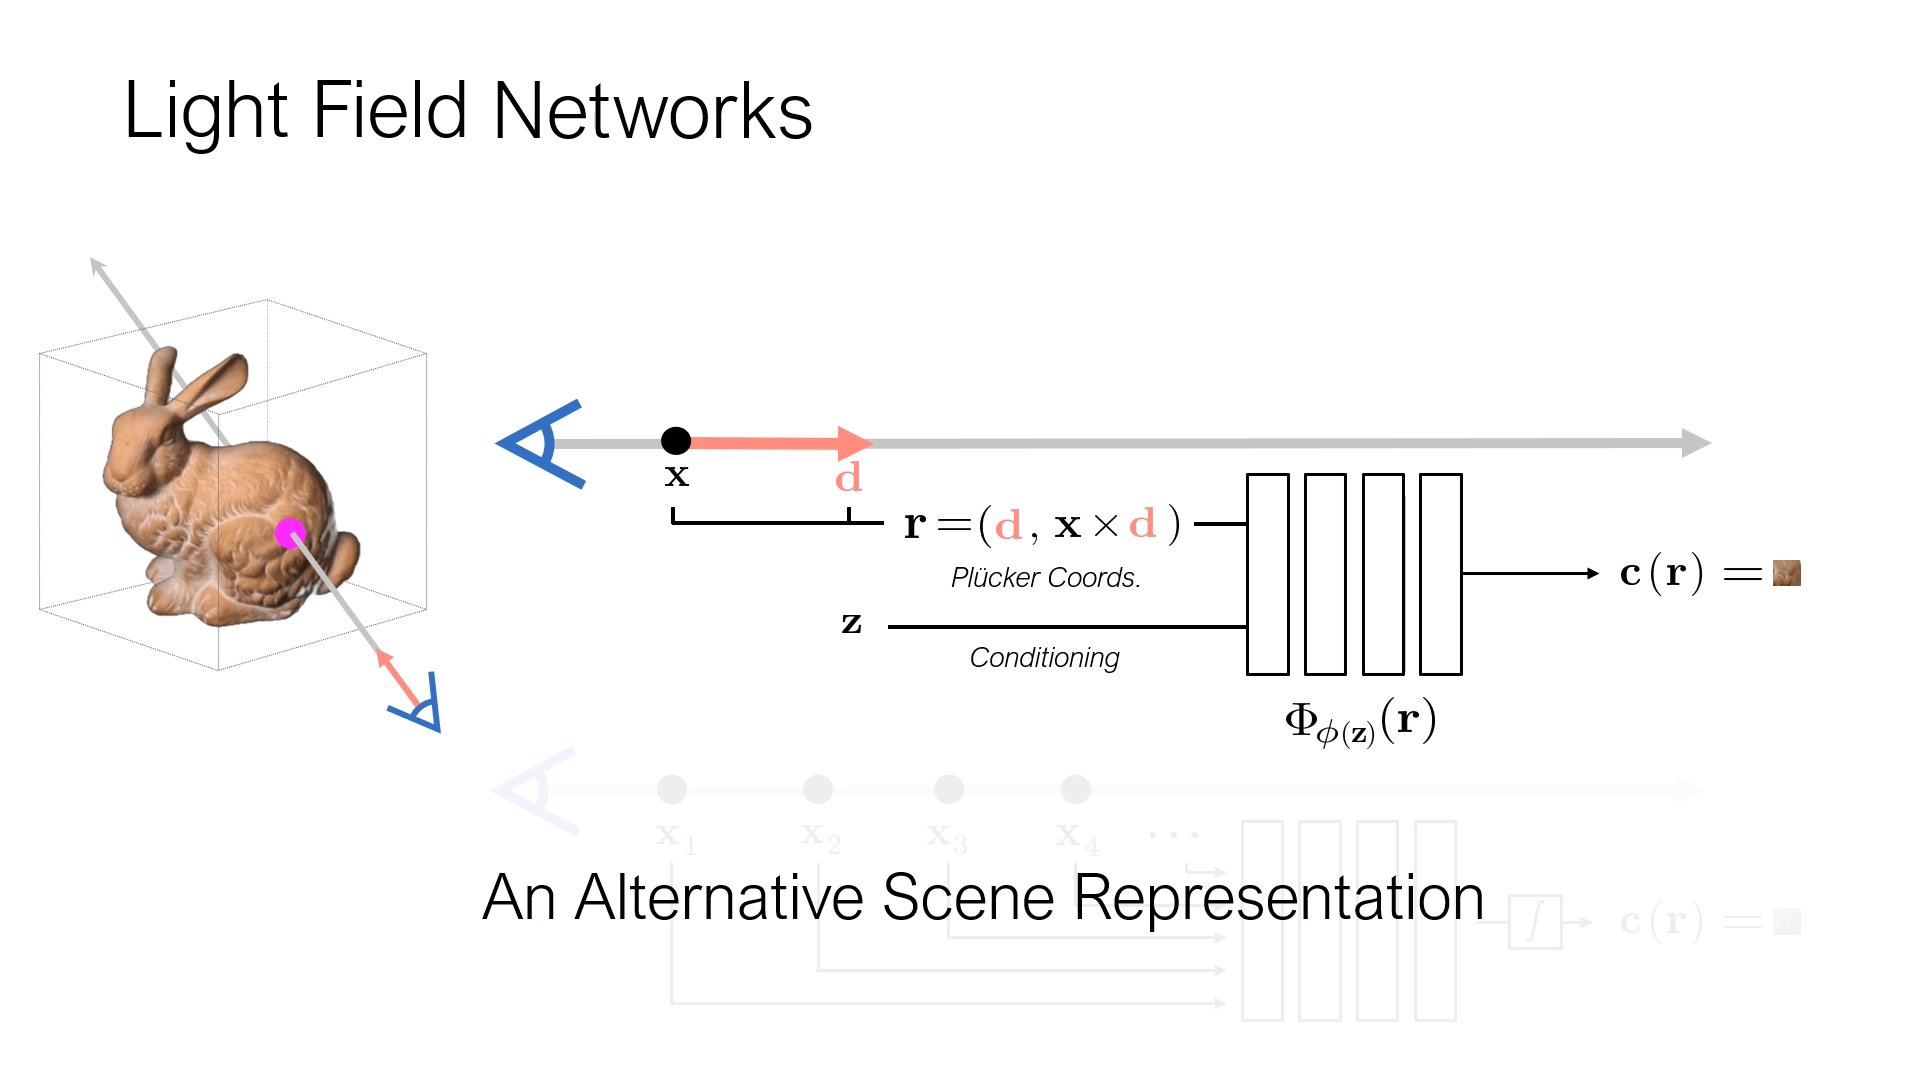 Vincent Sitzmann Twitter: "Introducing Field Networks: Neural Scene Representations with Single-Evaluation Rendering"! https://t.co/cMcj6bMtMx (w/ video!) LFNs are the first fully implicit neural scene representation with real-time rendering ...